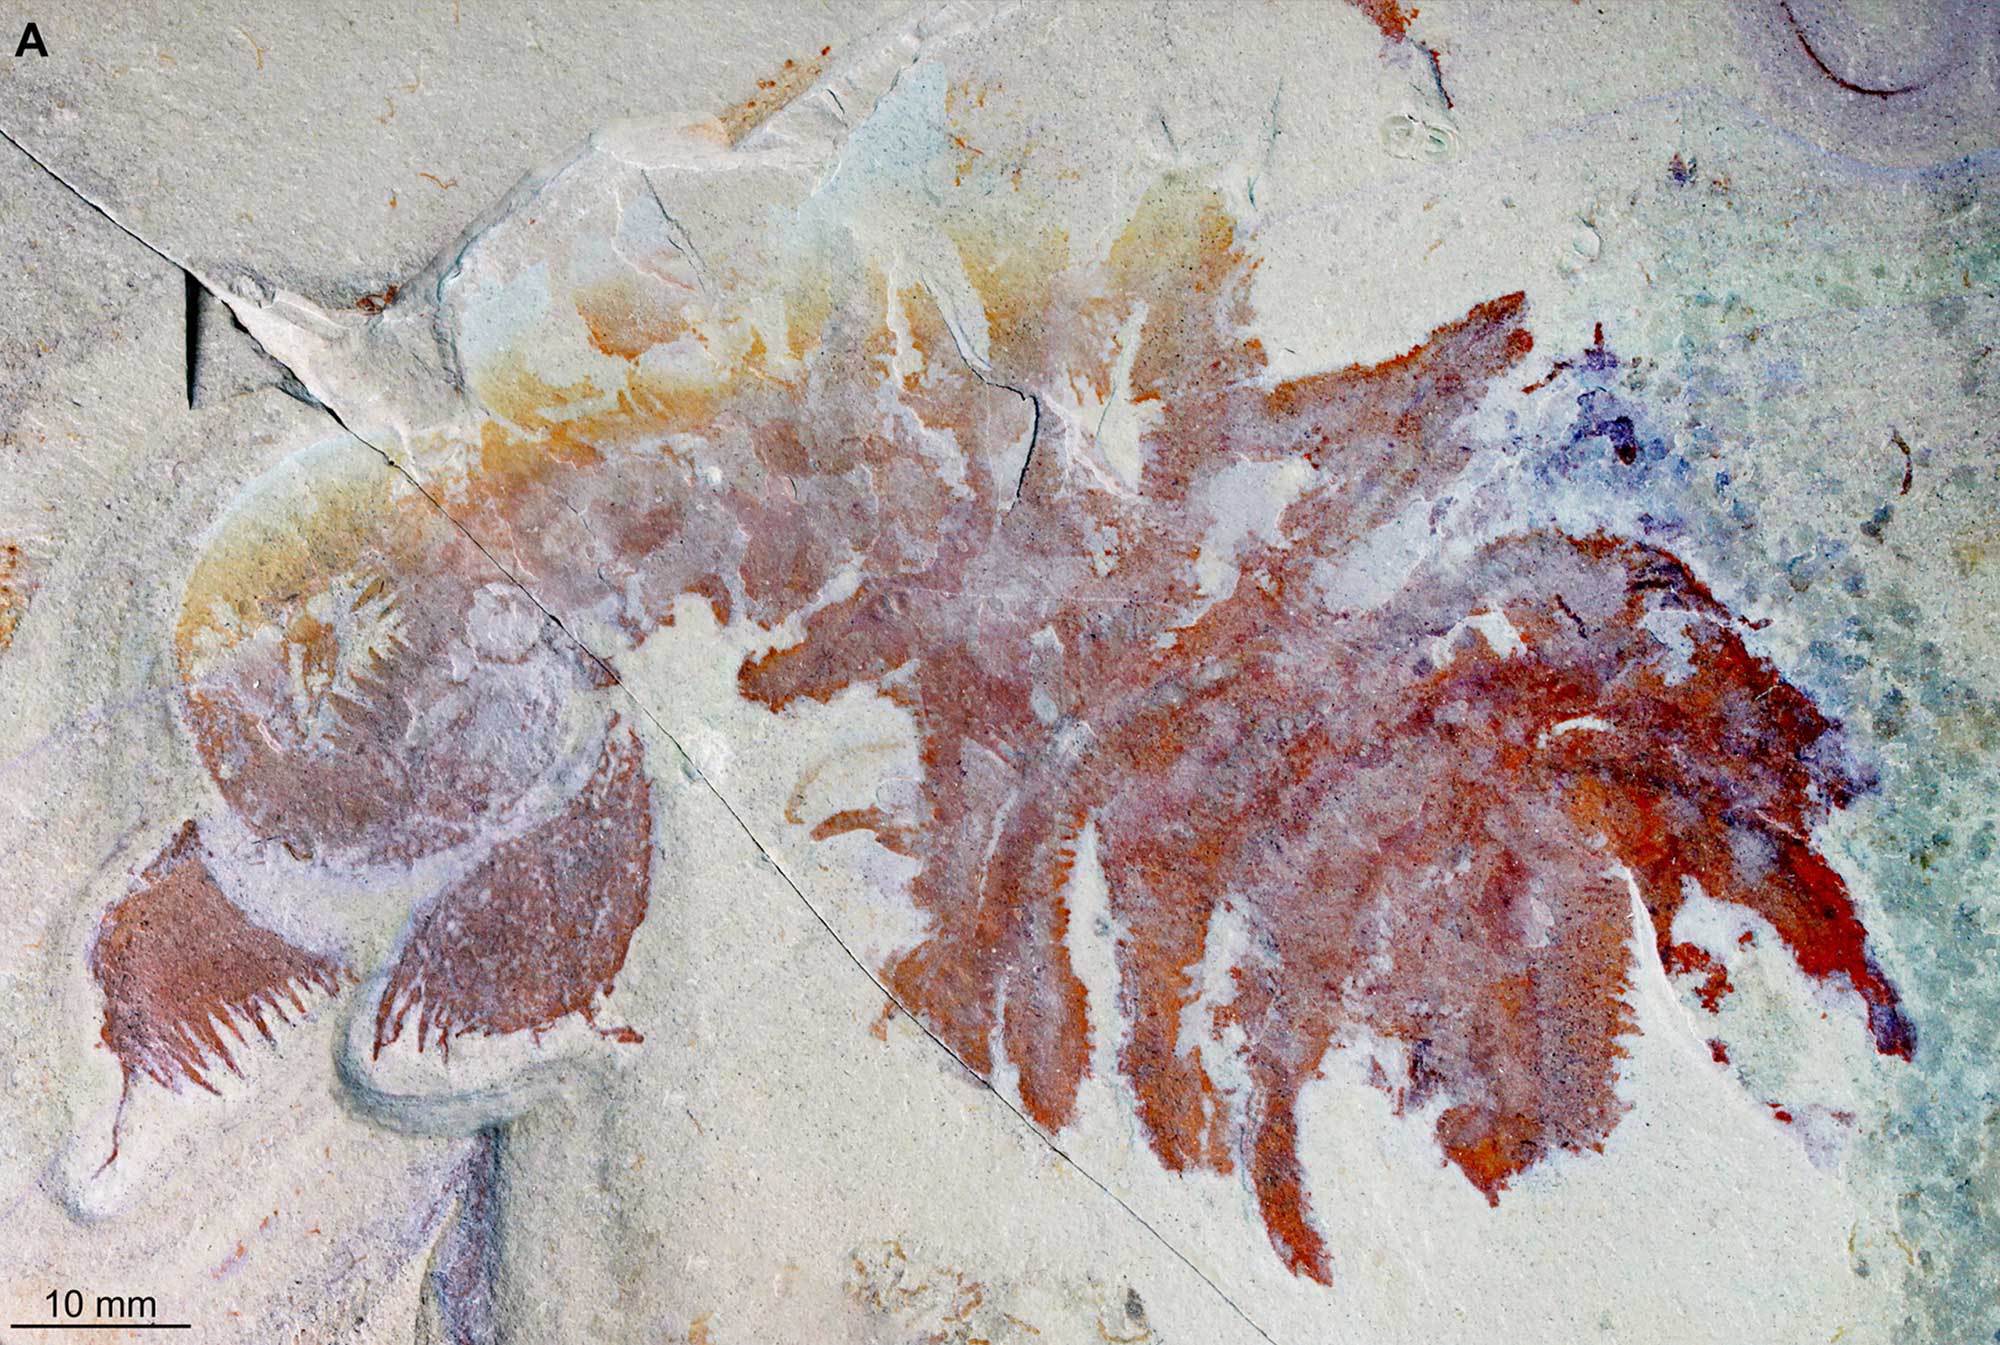 Photograph of a fossil of a radiodont from the Cambrian of Utah. The fossil is reddish and preserved on a whitish rock. The animal has a round head with bristly-looking appendages attached to its underside. The remainder of the body is made up of rectangular segments with paddle-like appendages extending from the side of each segment. The animal is probably over 10 centimeters long.